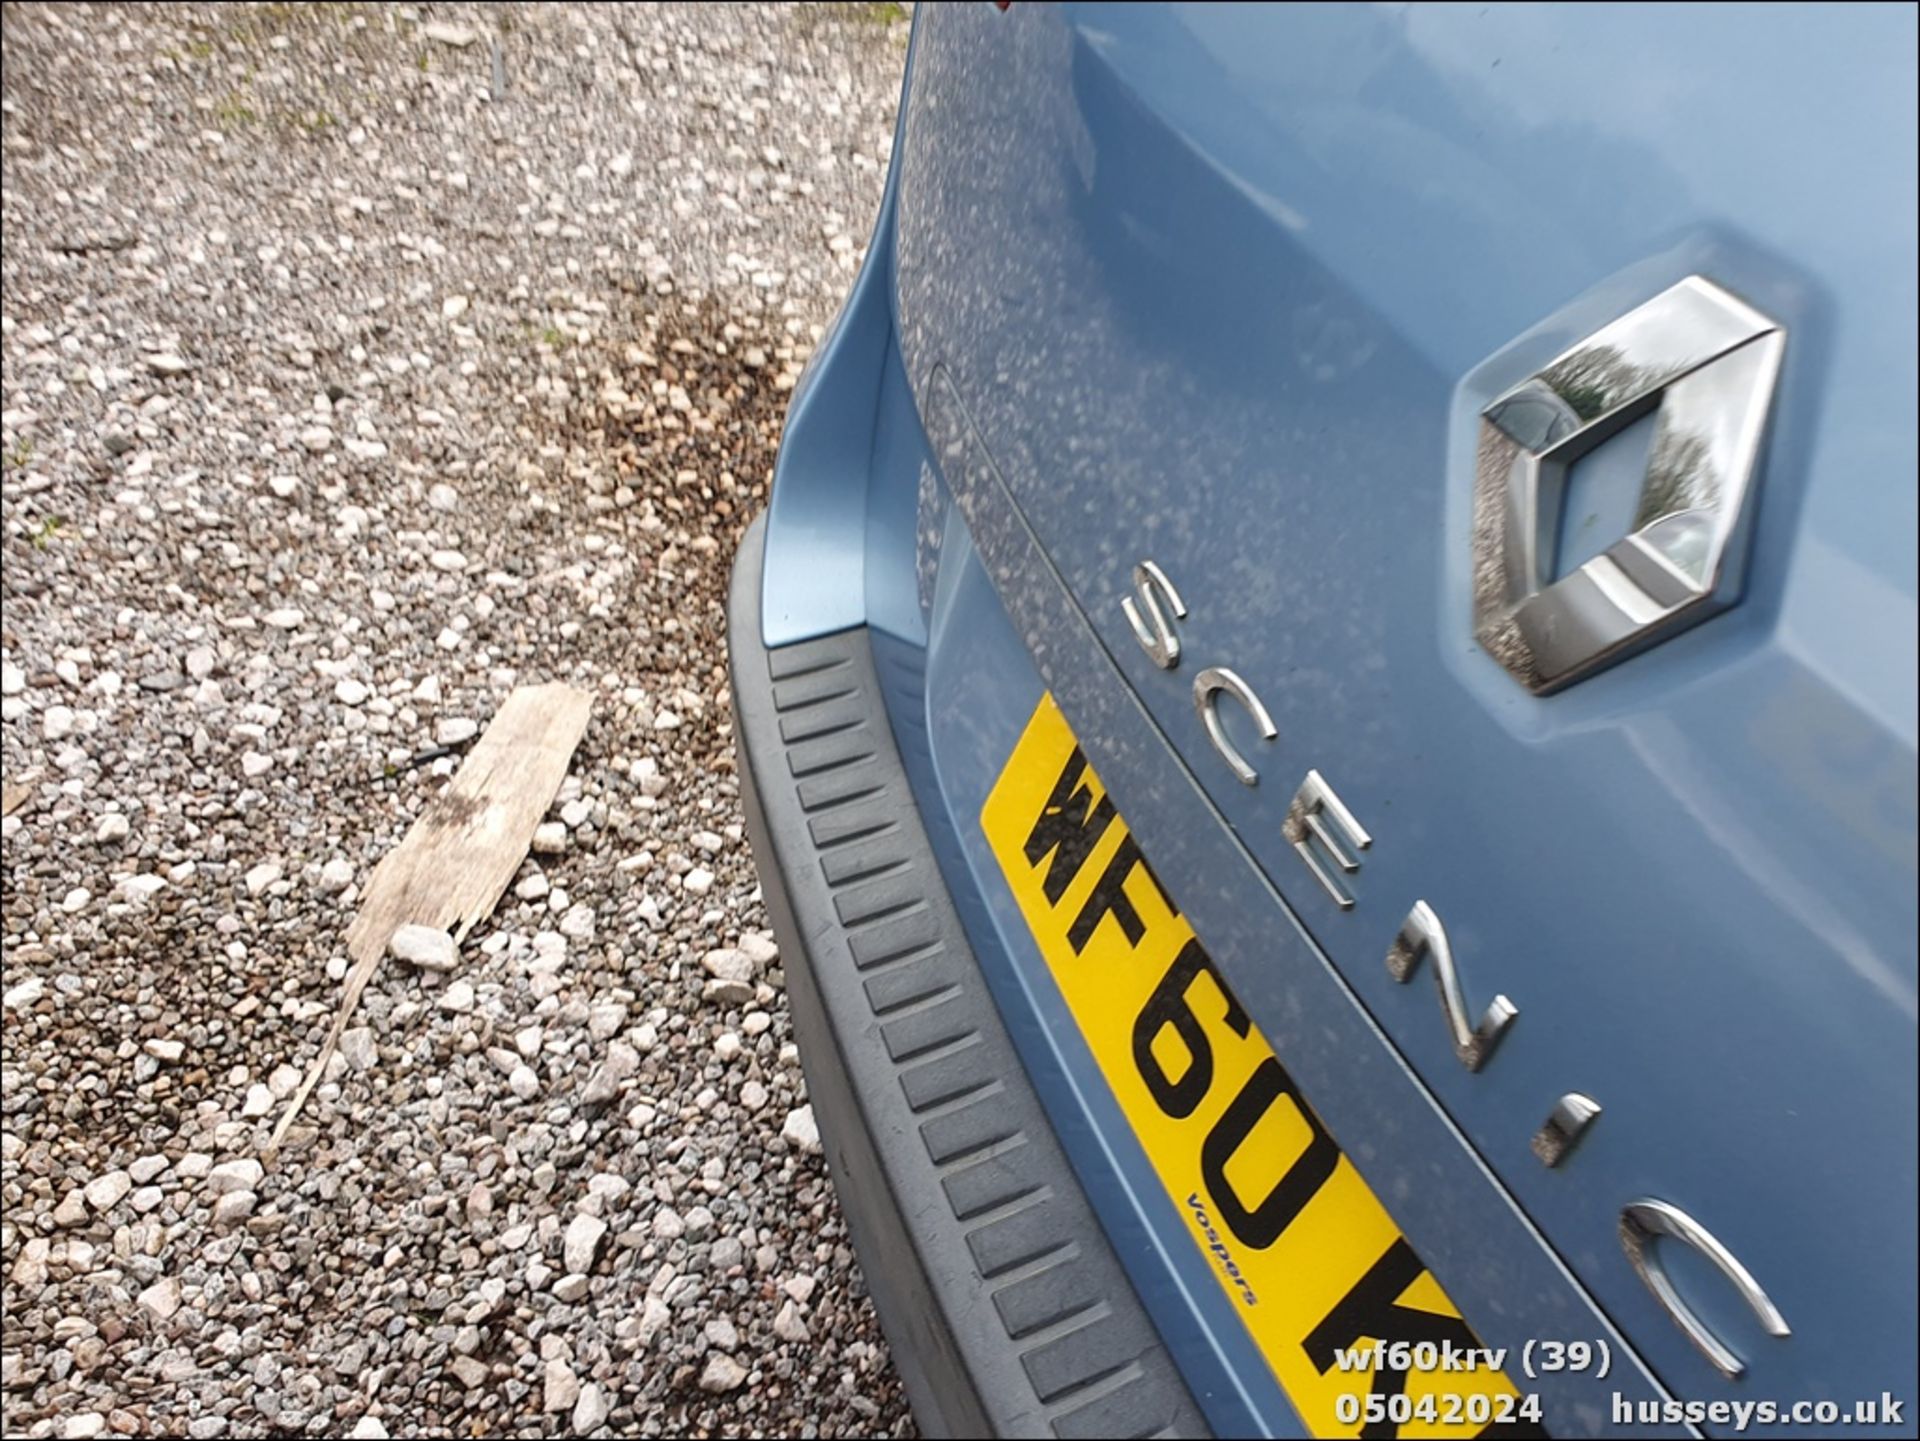 10/60 RENAULT SCENIC EXPRESSION DCI 105 - 1461cc 5dr MPV (Blue) - Image 40 of 50